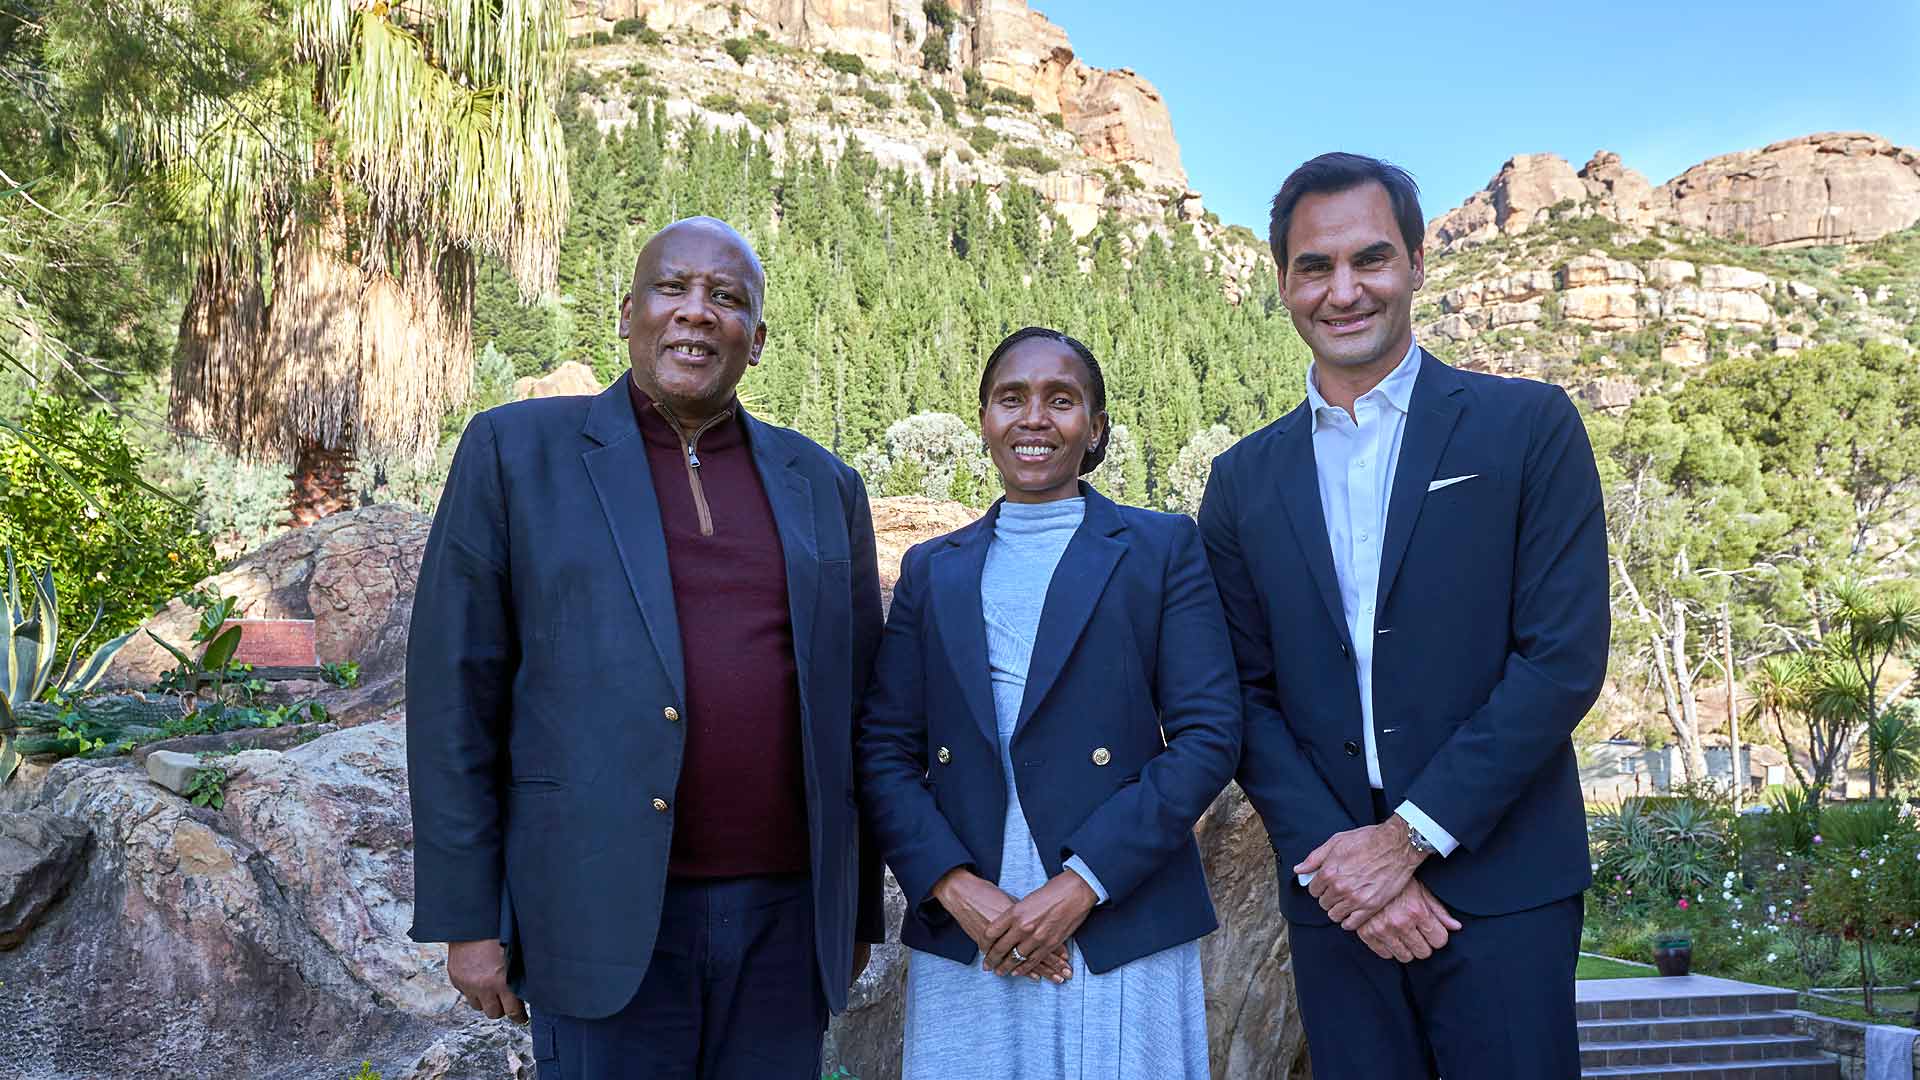 His Majesty King Letsie III, Her Majesty Queen ’Masenate Mohato Seeiso and <a href='https://www.atptour.com/en/players/roger-federer/f324/overview'>Roger Federer</a>